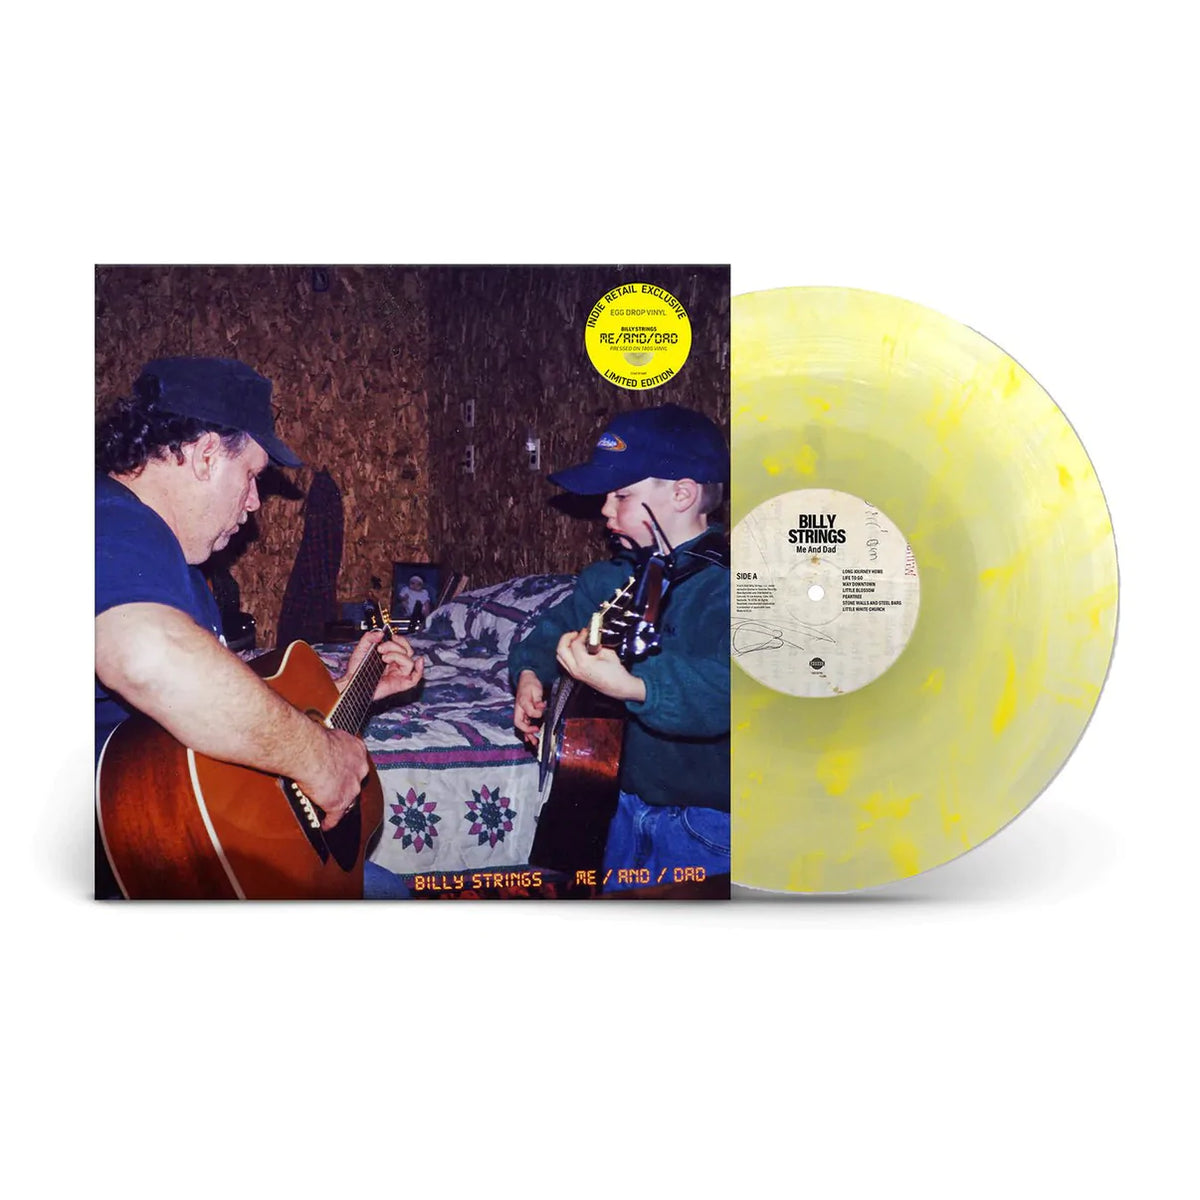 Billy Strings – Me / And / Dad LP (180g, Yellow Vinyl, Gatefold)